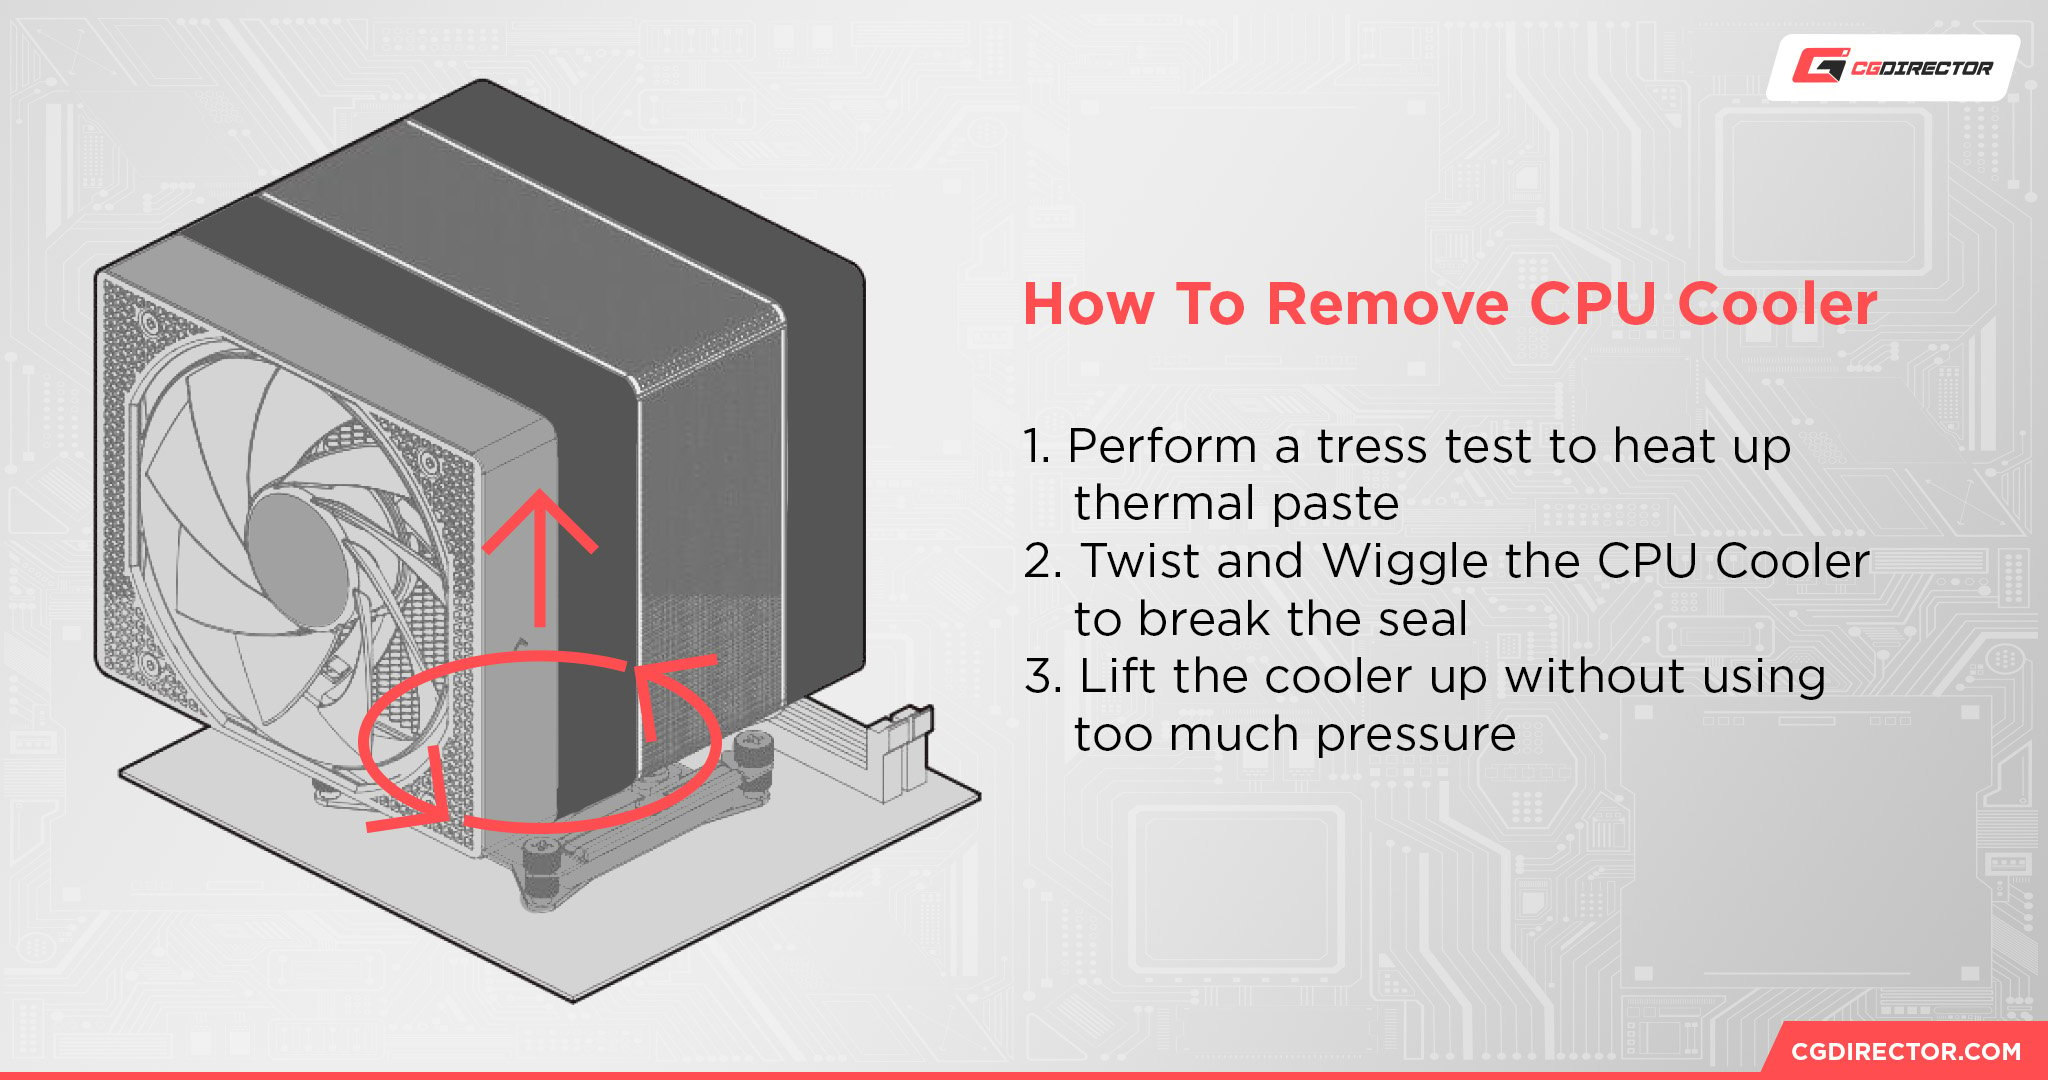 How To Remove CPU Cooler